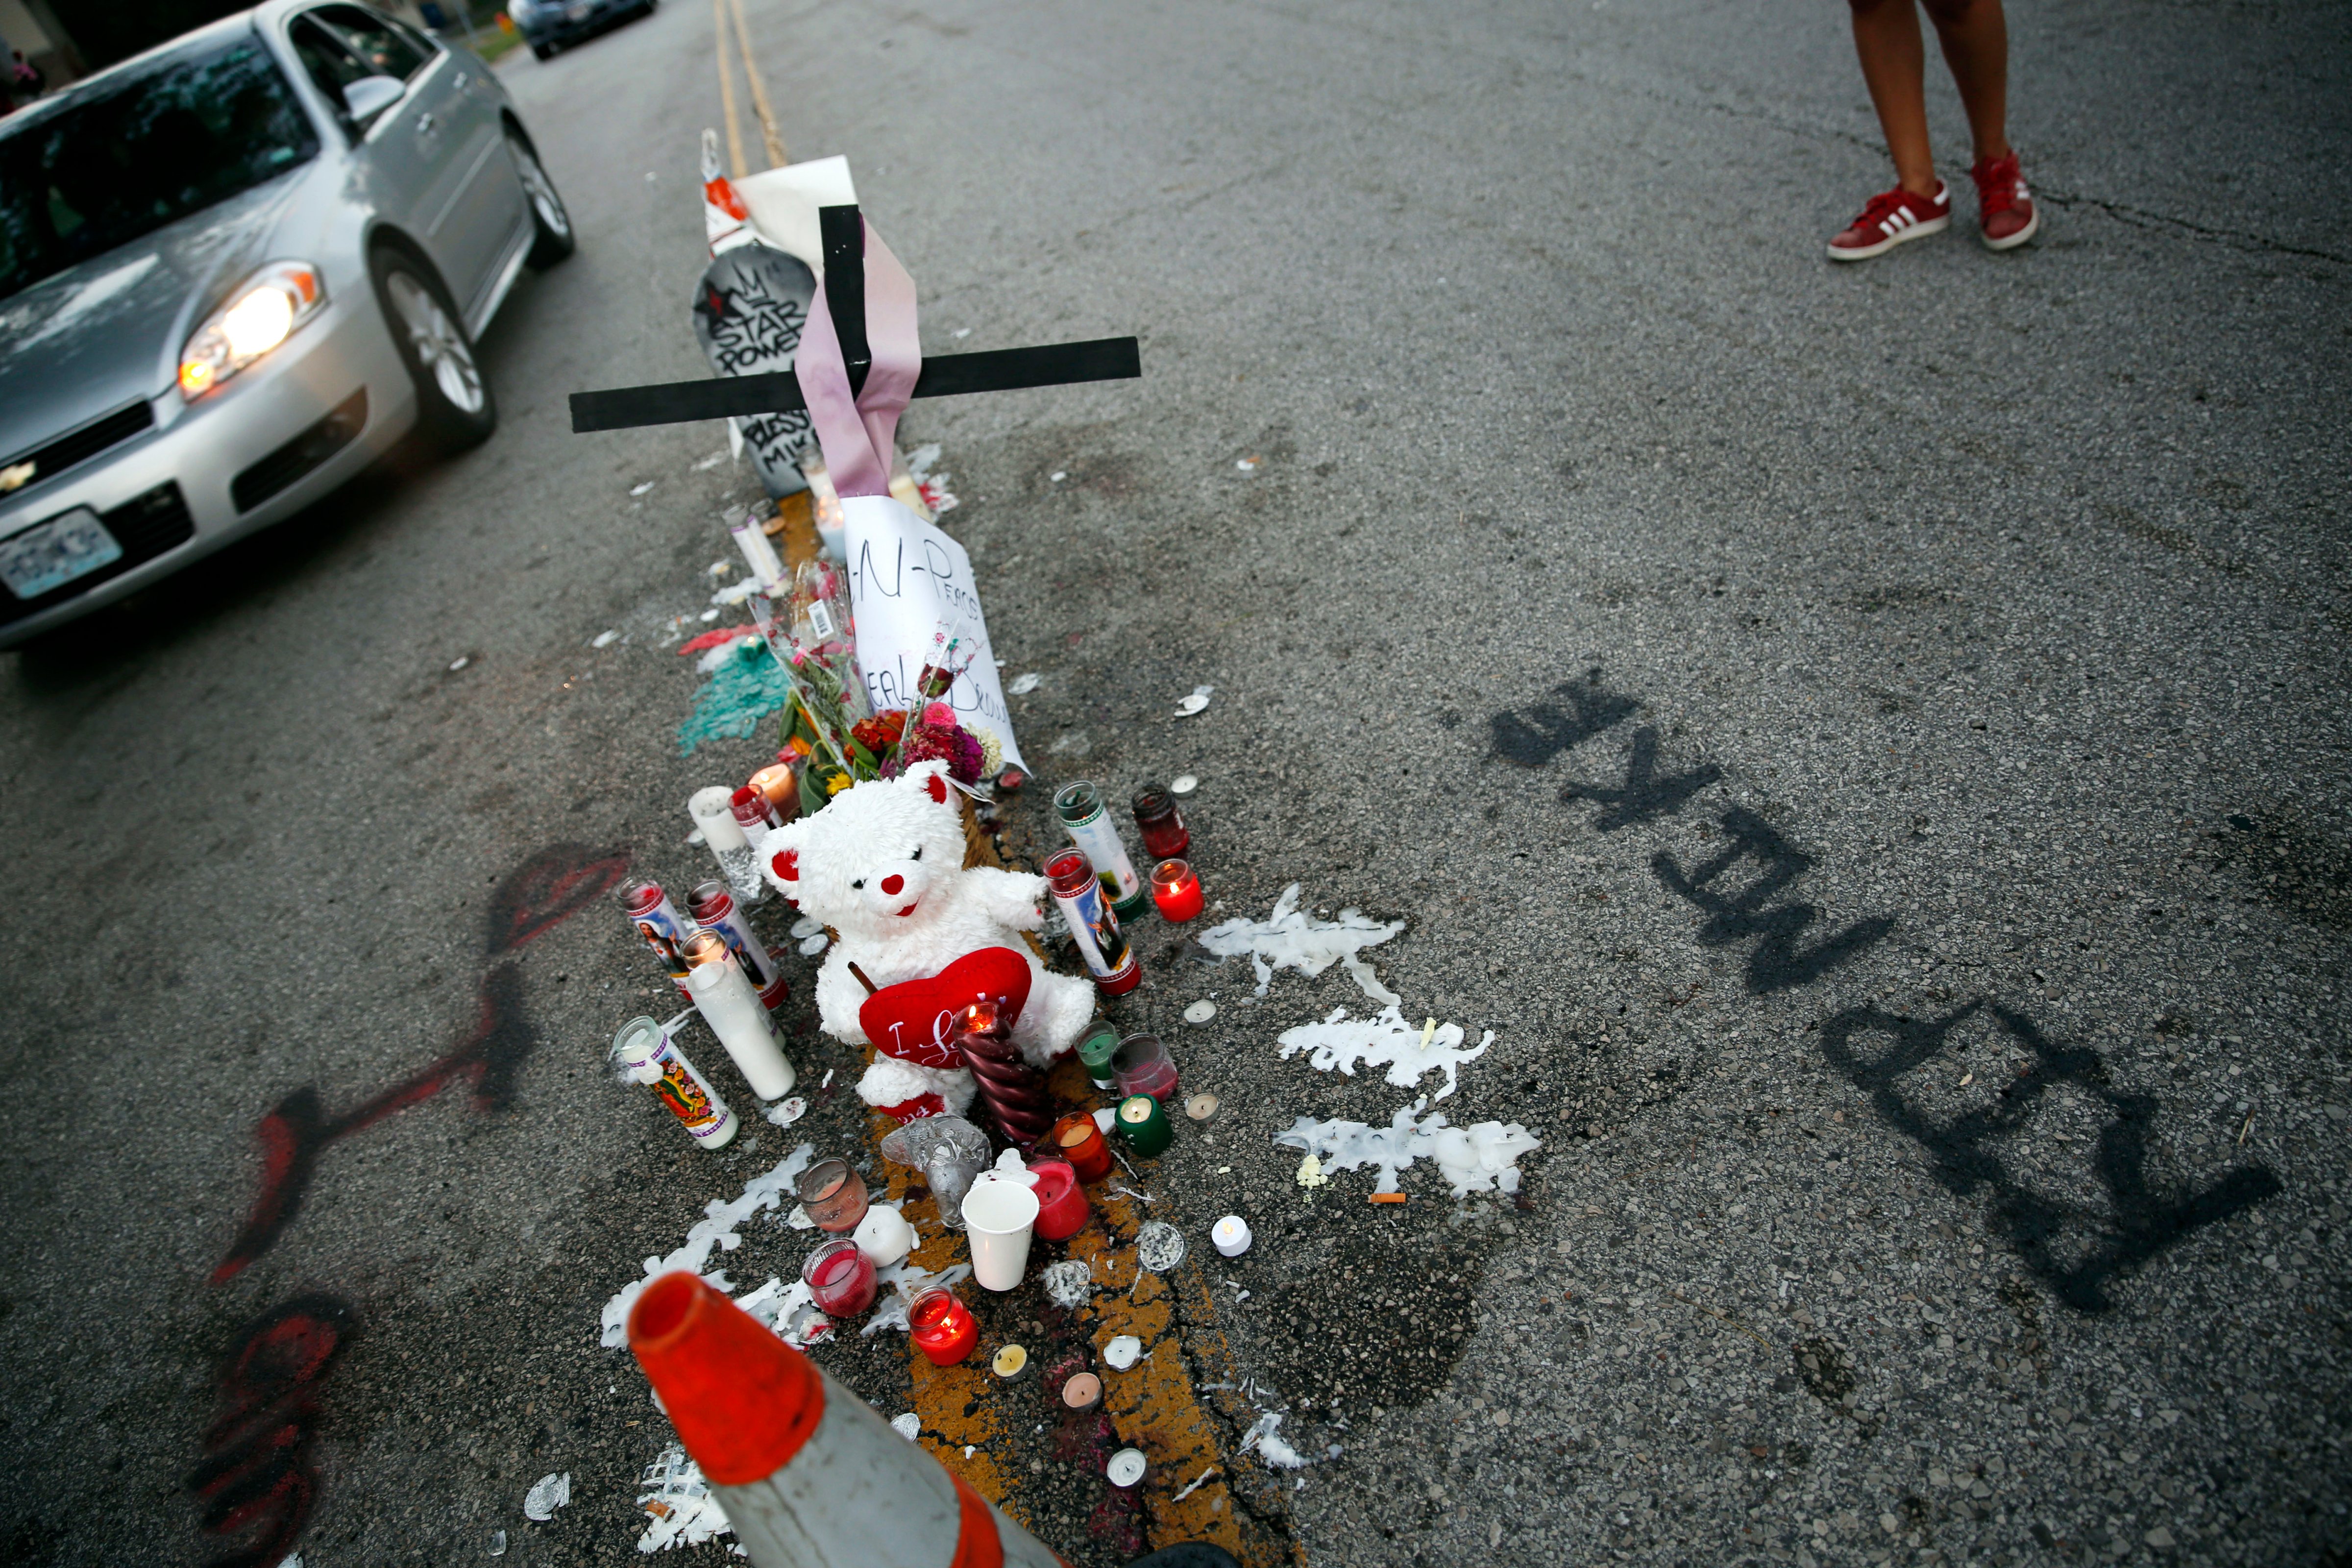 A makeshift memorial sits in the middle of the street where 18-year-old Michael Brown was shot and killed by police (Jeff Roberson&mdash;AP)